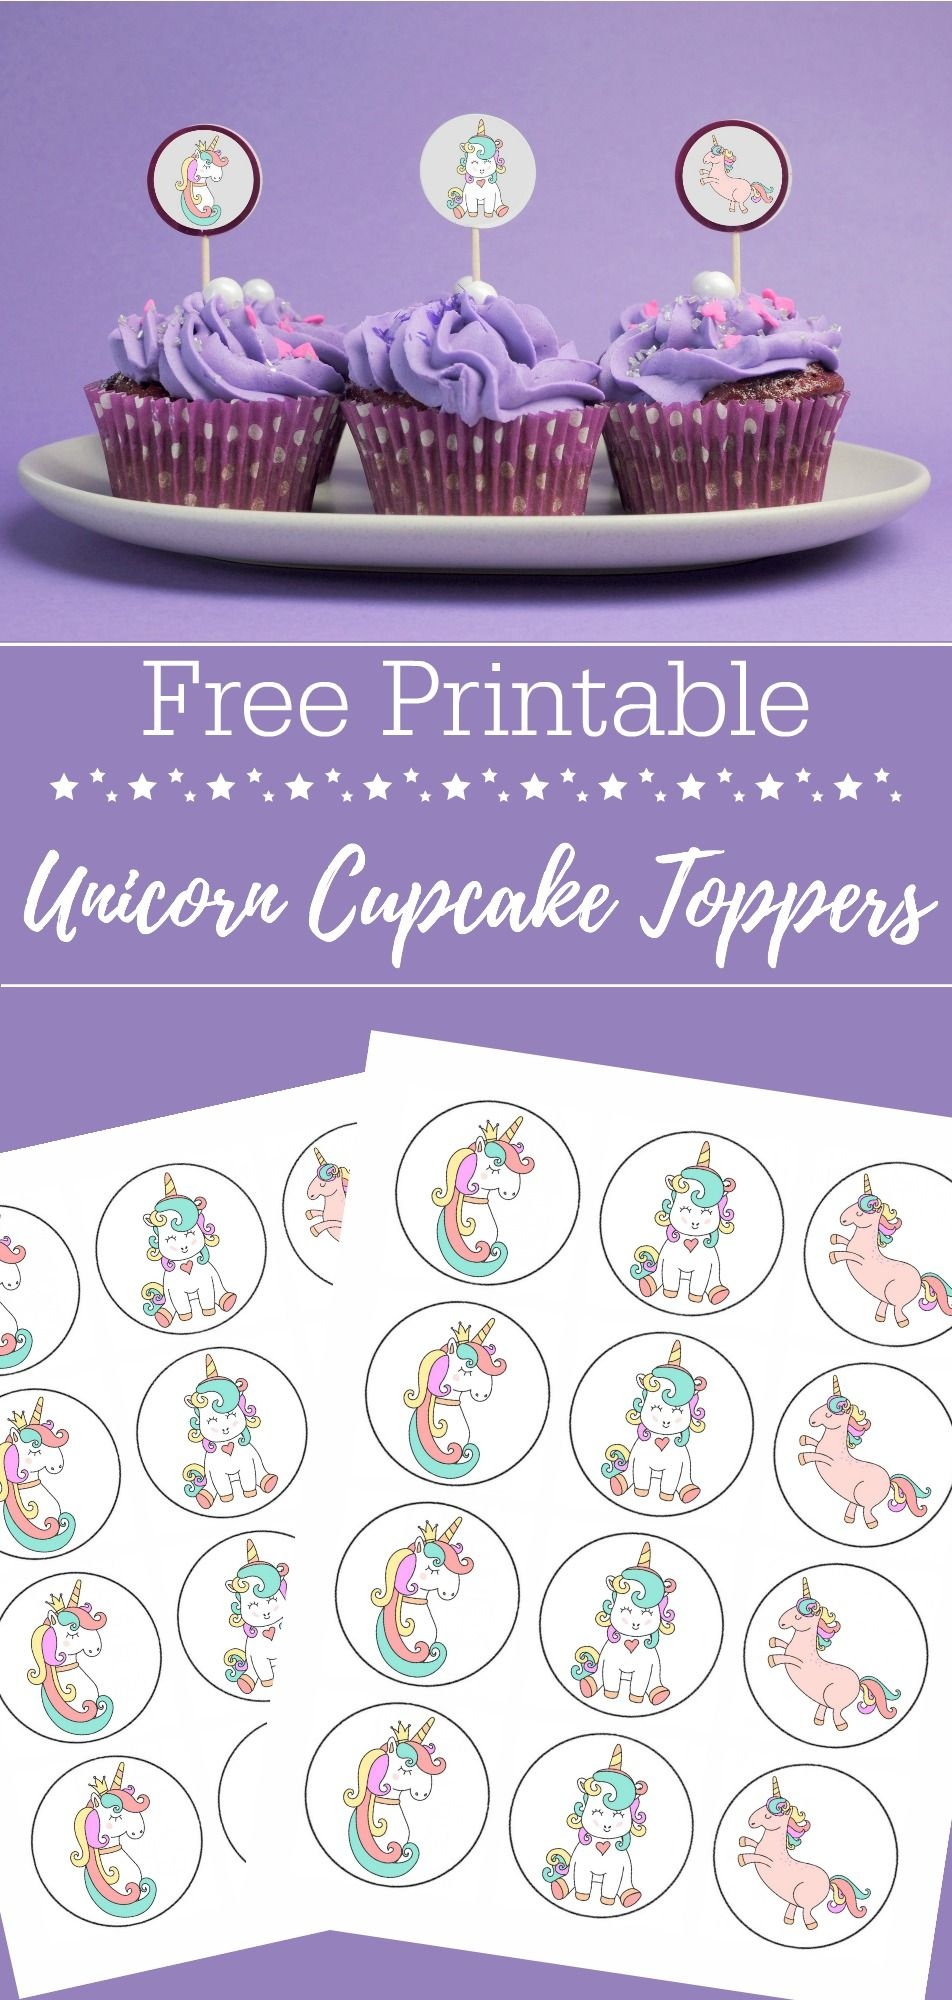 Free Printable Unicorn Cupcake Toppers | Best Of Life. Family. Joy - Free Printable Unicorn Cupcake Toppers